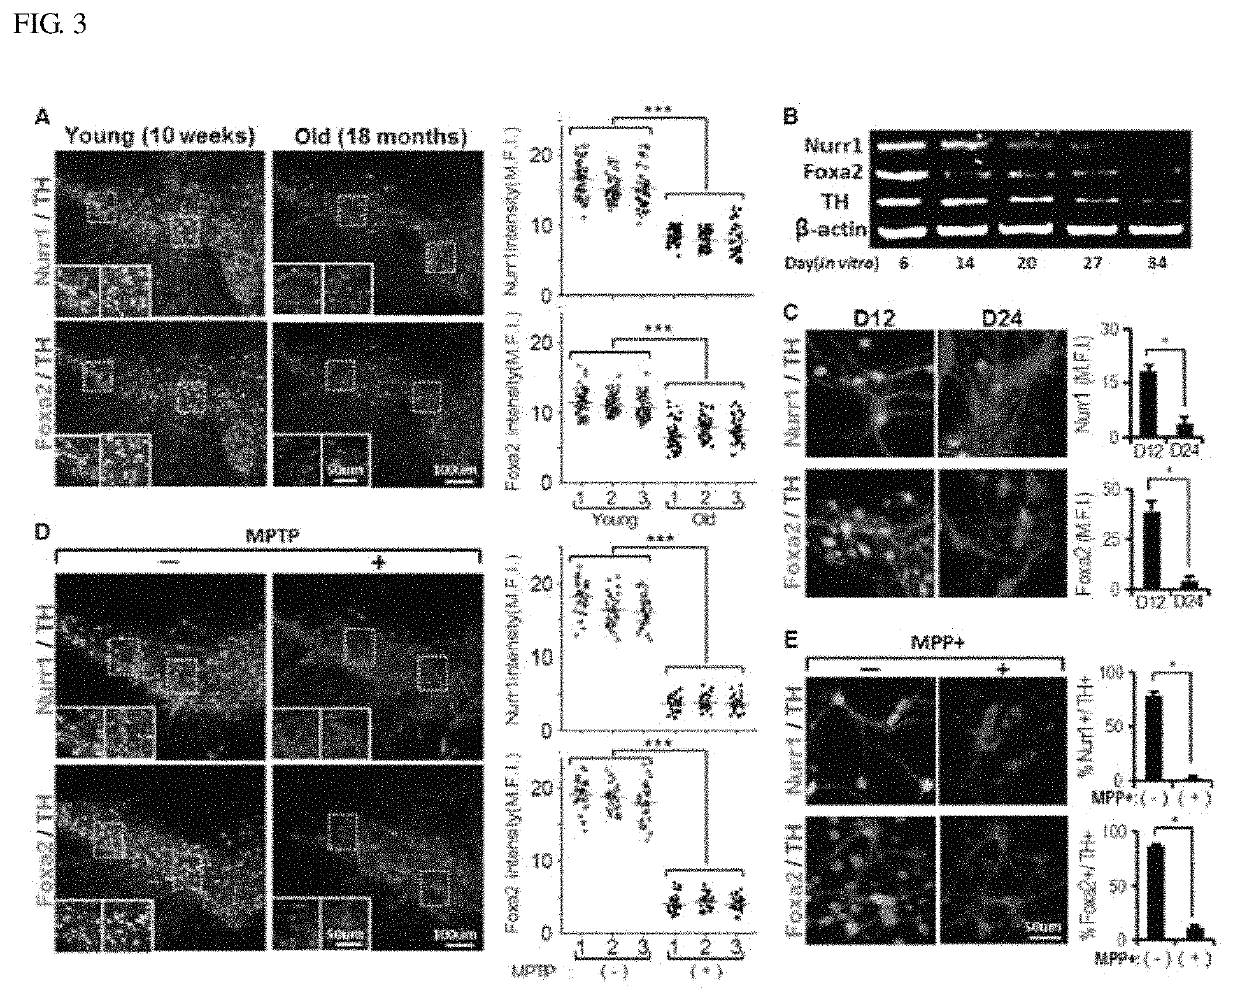 Therapeutic effects of NURR1 and FOXA2 in inflammatory neurologic disorders by M1-to-M2 polarization of glial cells